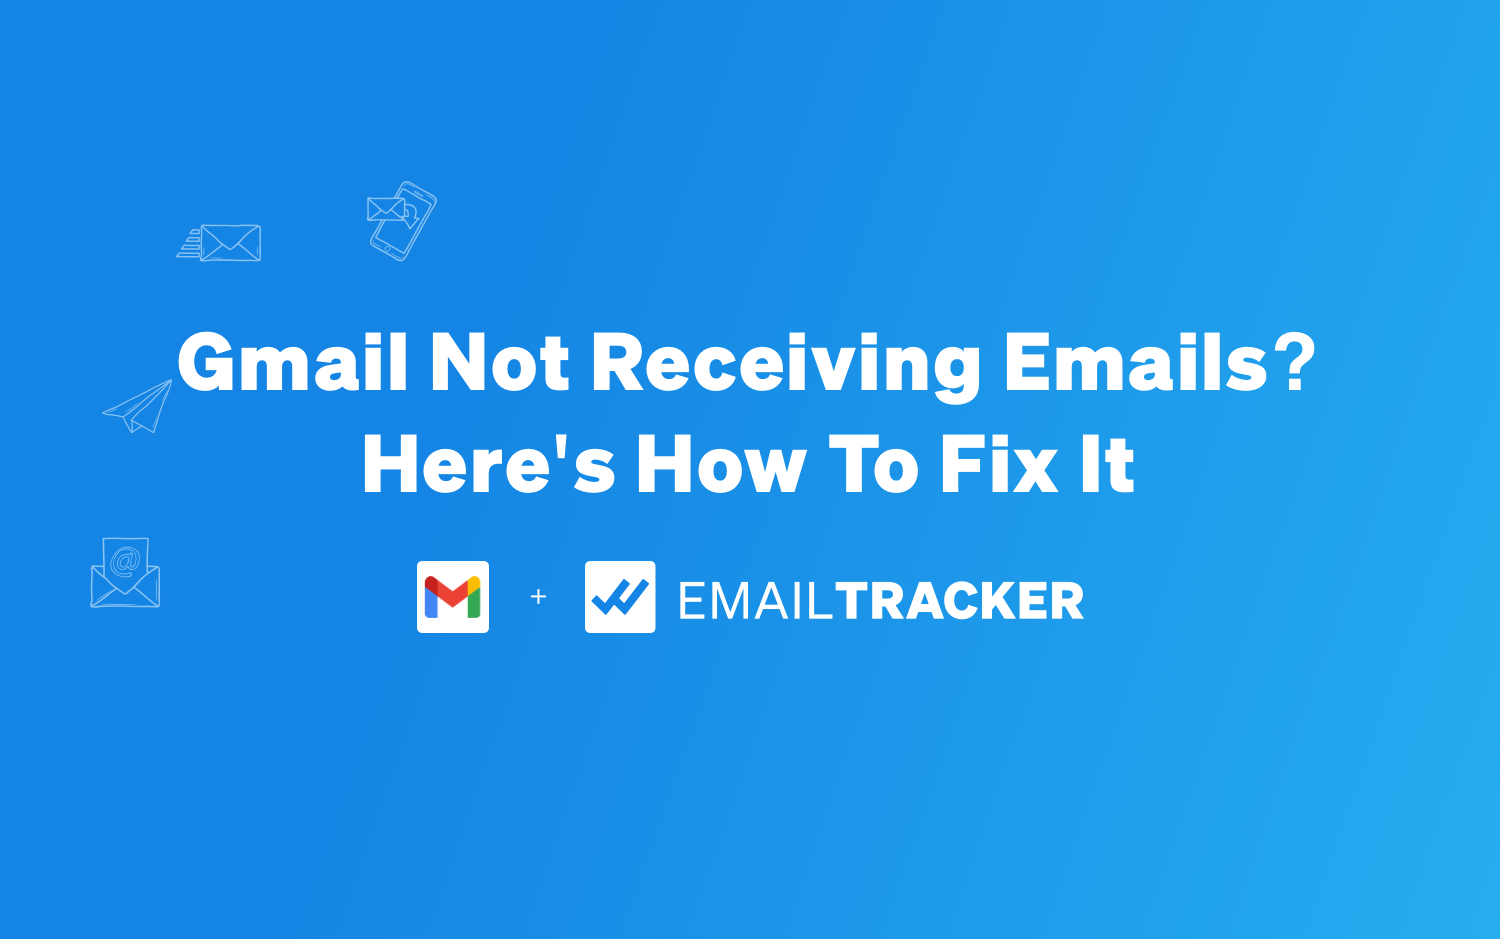  Gmail Not Receiving Emails? Here's How To Fix It